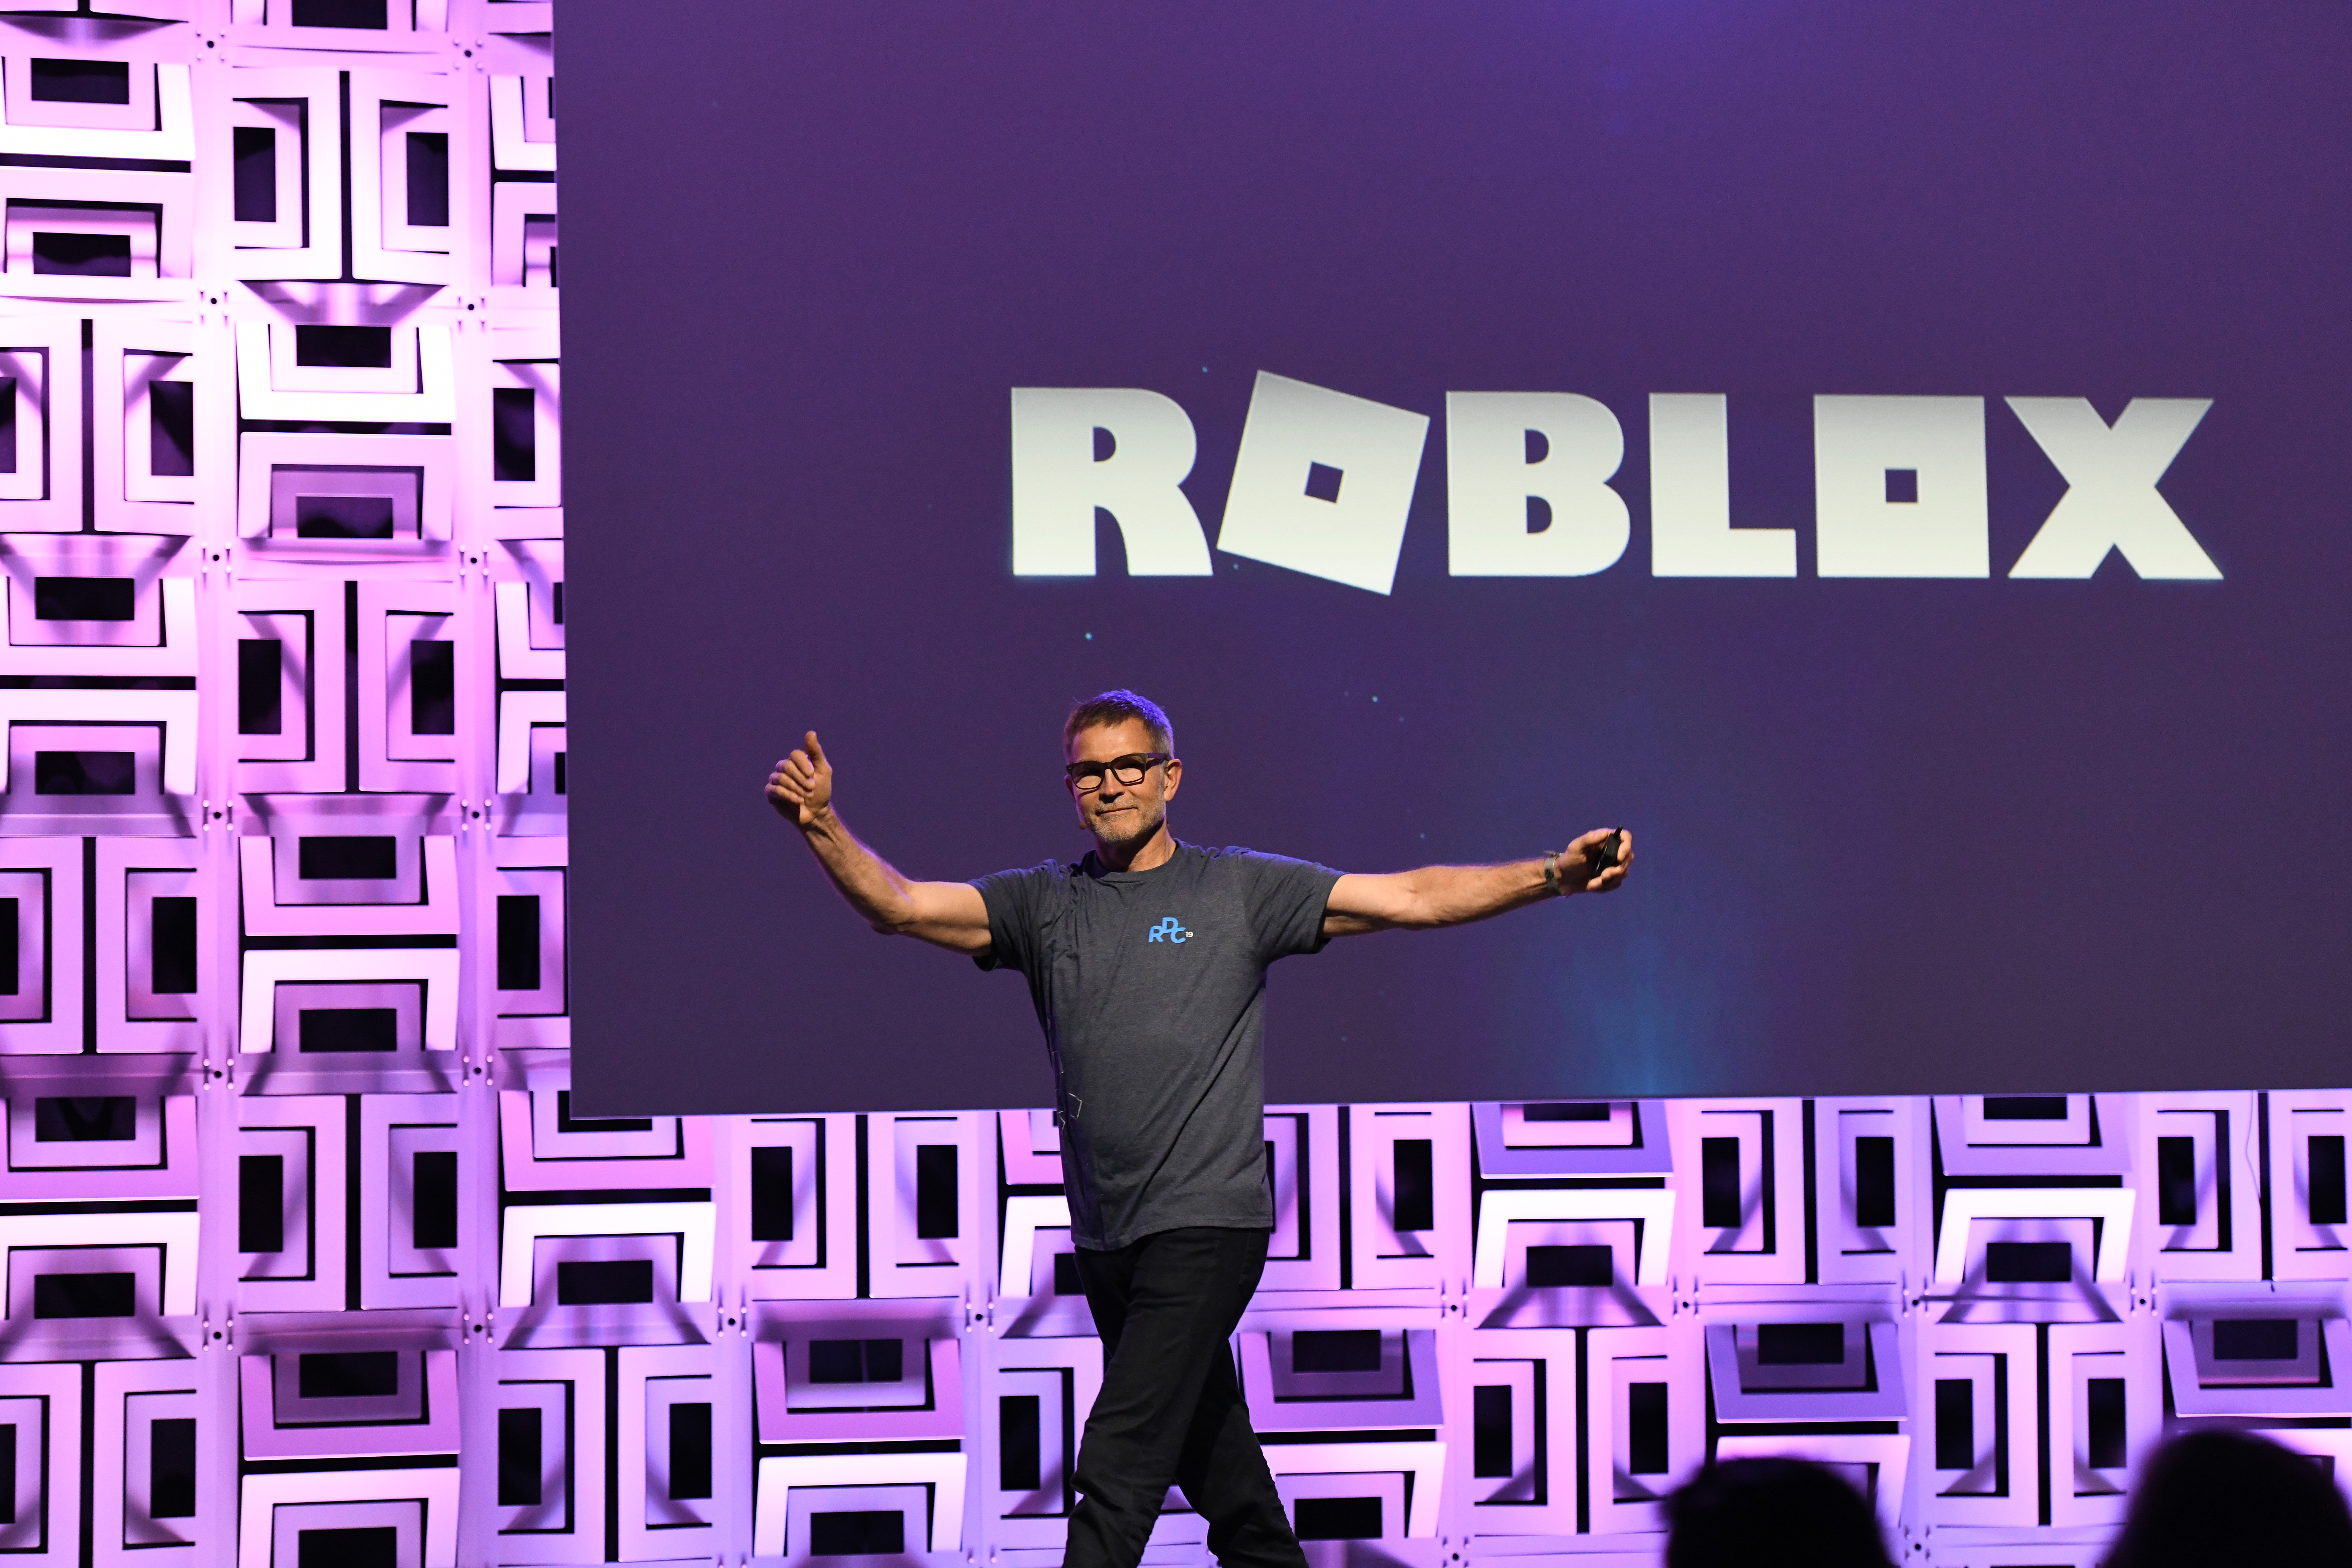 Roblox: Growing Up (NYSE:RBLX)